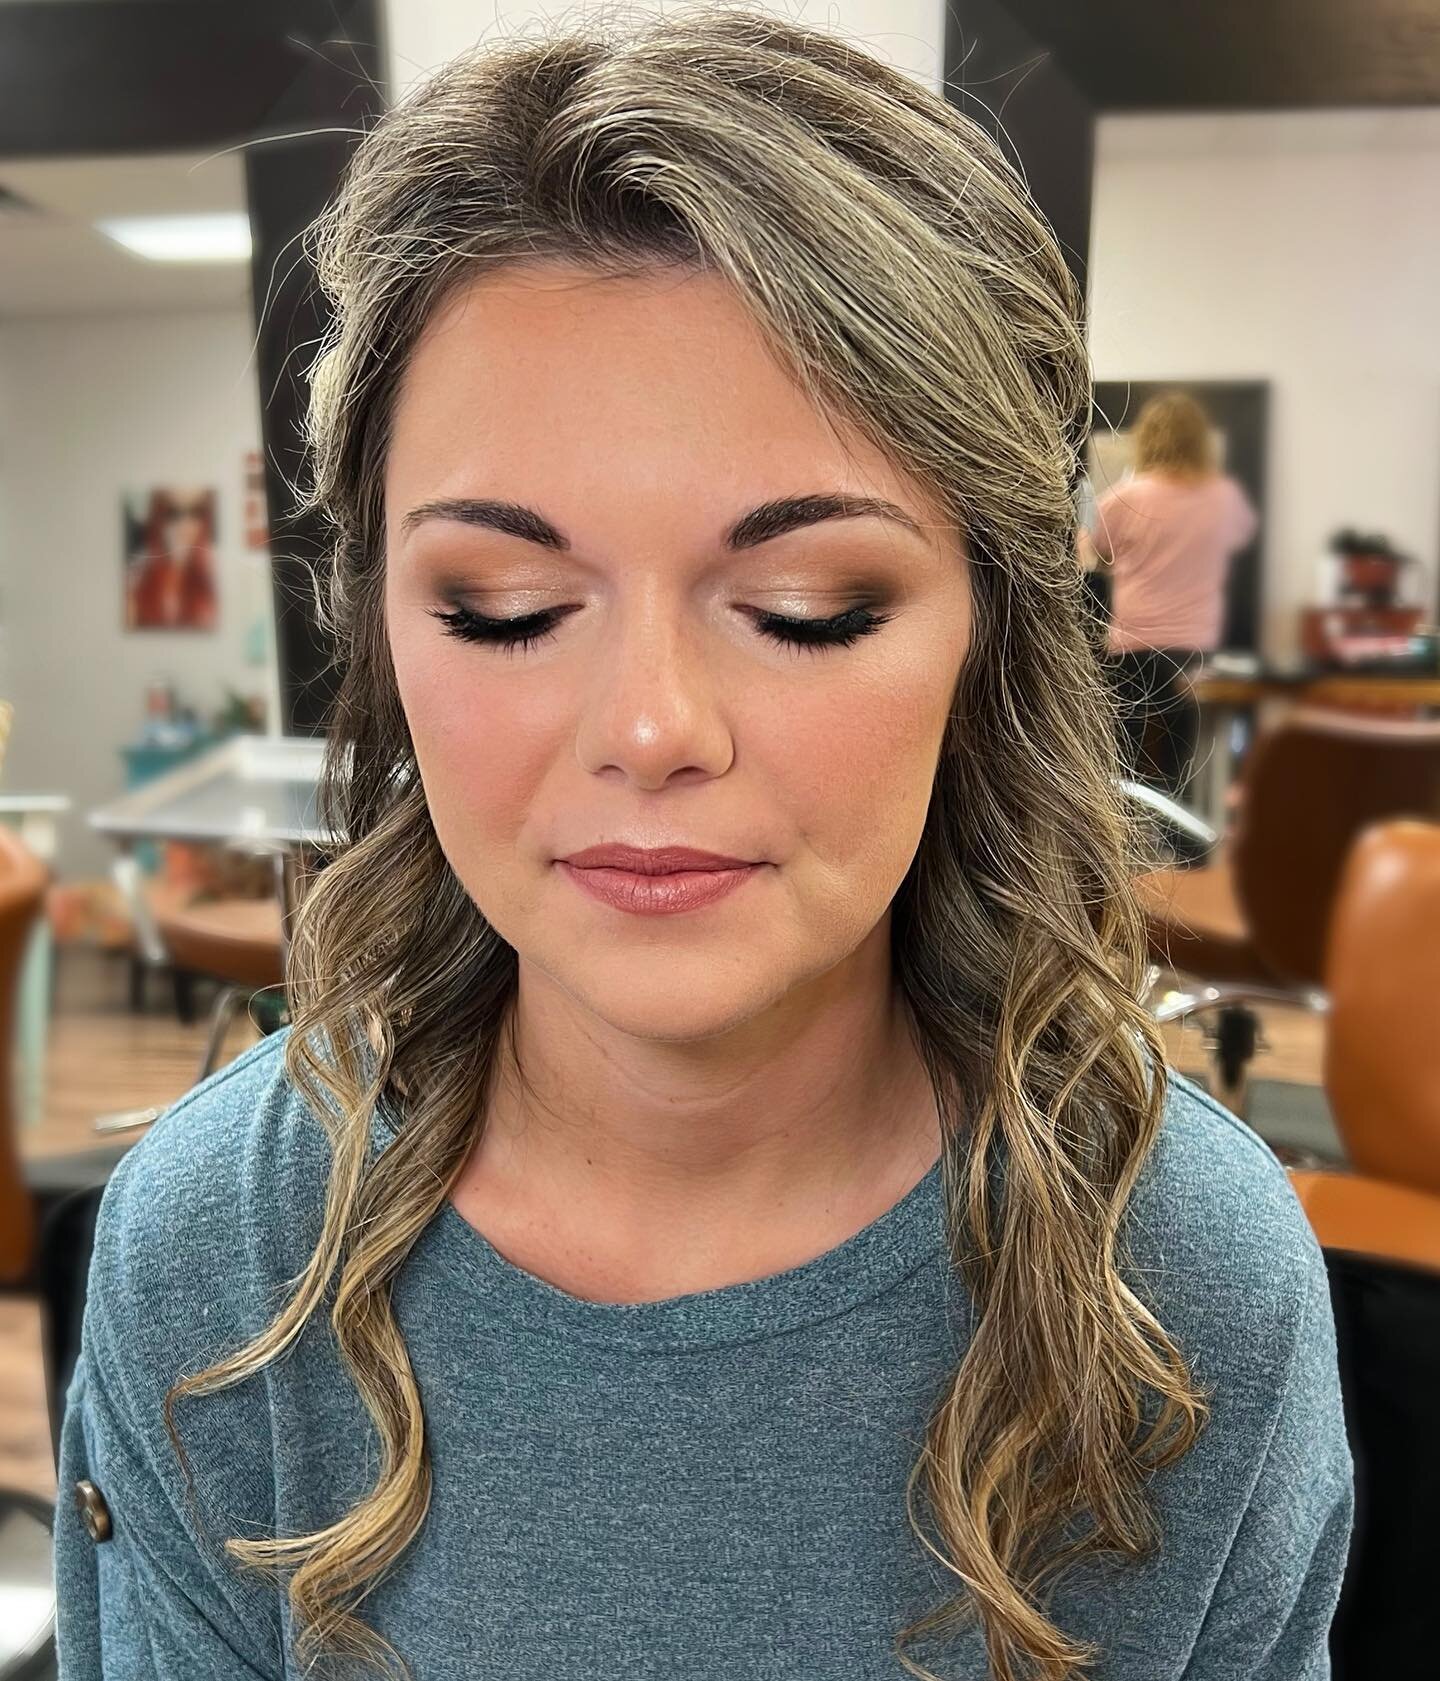 Natural toned look on Adrianna for her bridal portraits&mdash; swipe for a video 🤍💍
Hair by Dawn with @shinesalonsavannah 
#savannahmakeupartist #savannahbride #savannahwedding #savannahweddings #makeup #savannah #savannahga #blufftonmakeupartist #